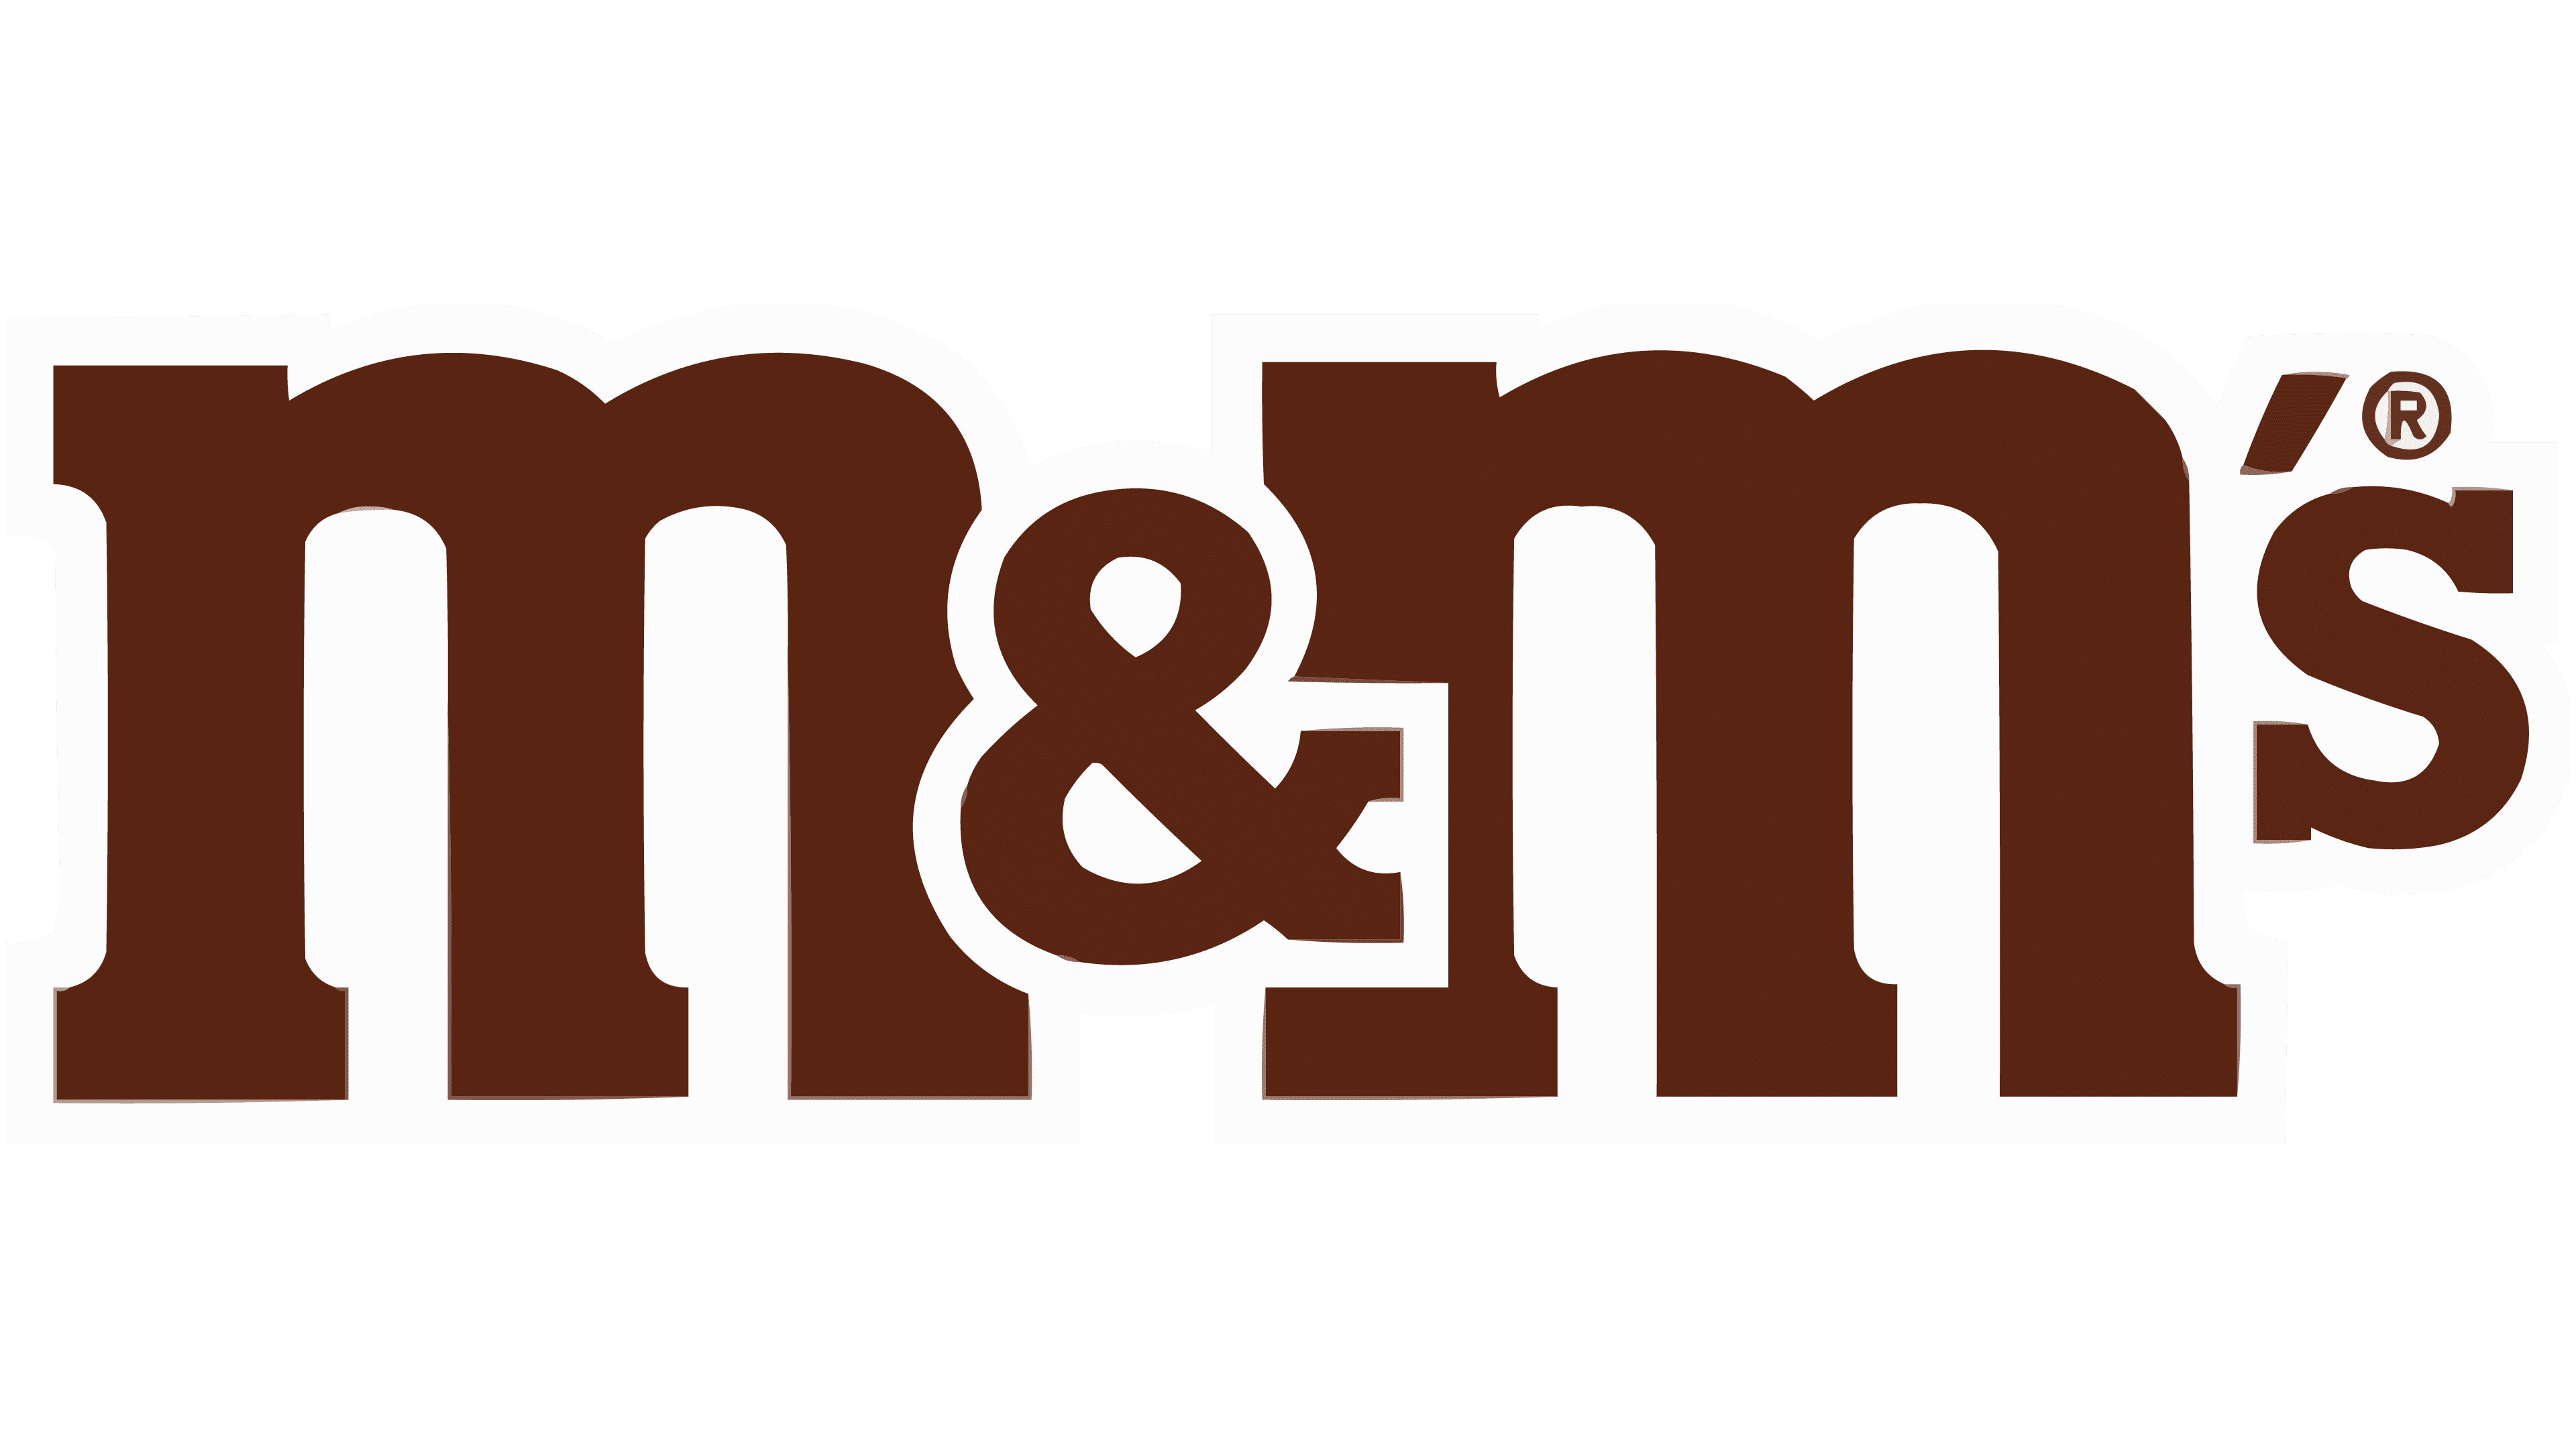 M&M'S USA - Tag the Brown to your Green.